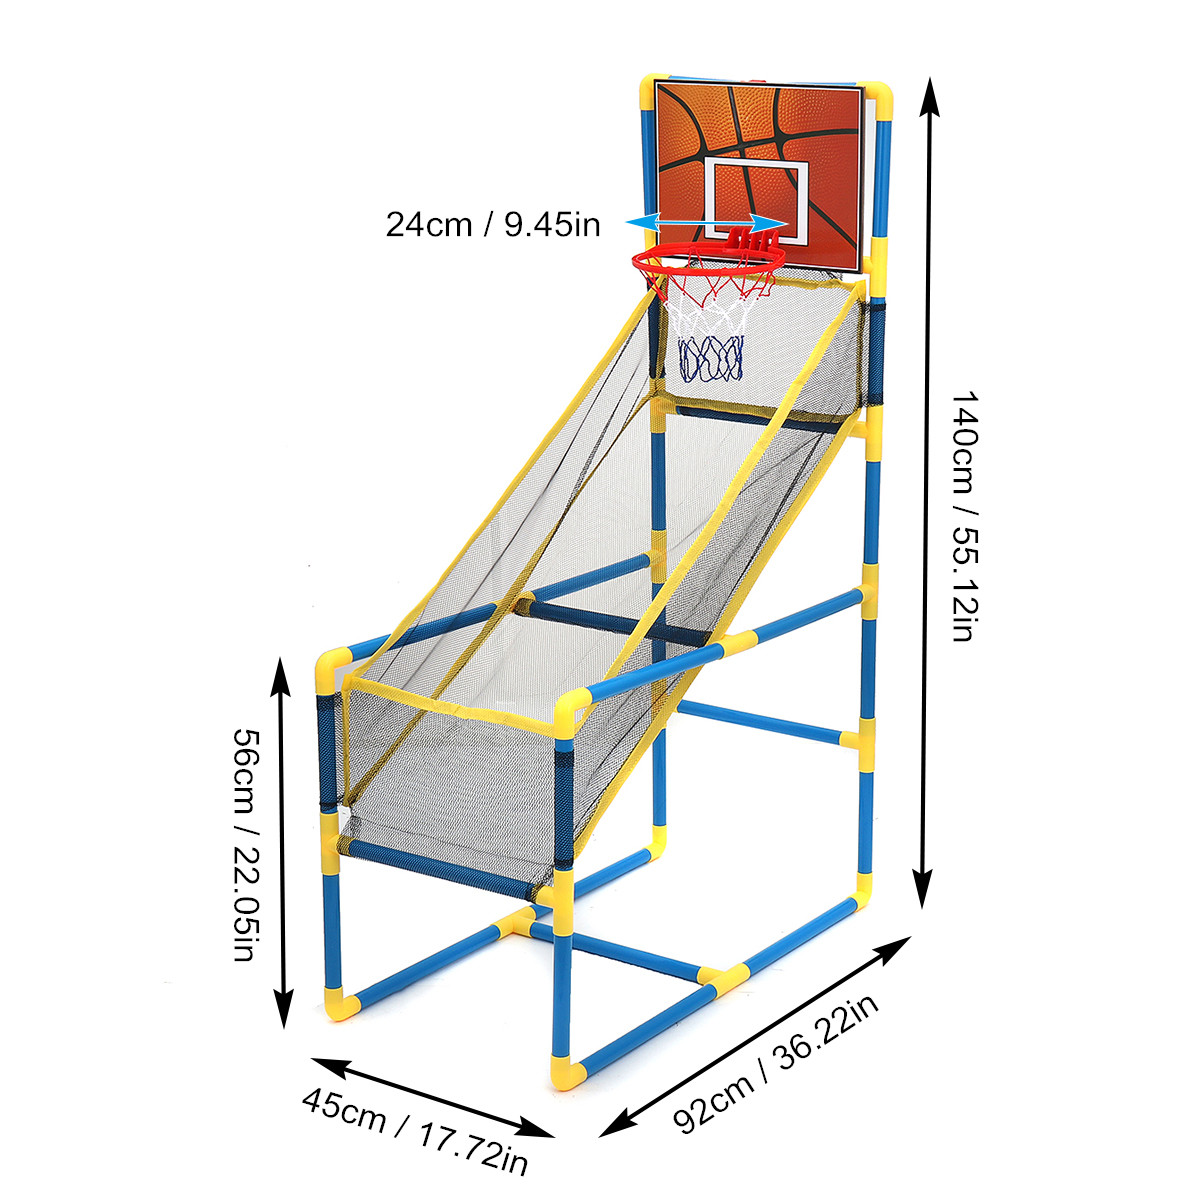 Children-Lightweight-Portable-Easy-Assemble-Basketball-Stand-Adjustable-Indoor-Outdoor-Sports-Toys-w-1829730-12